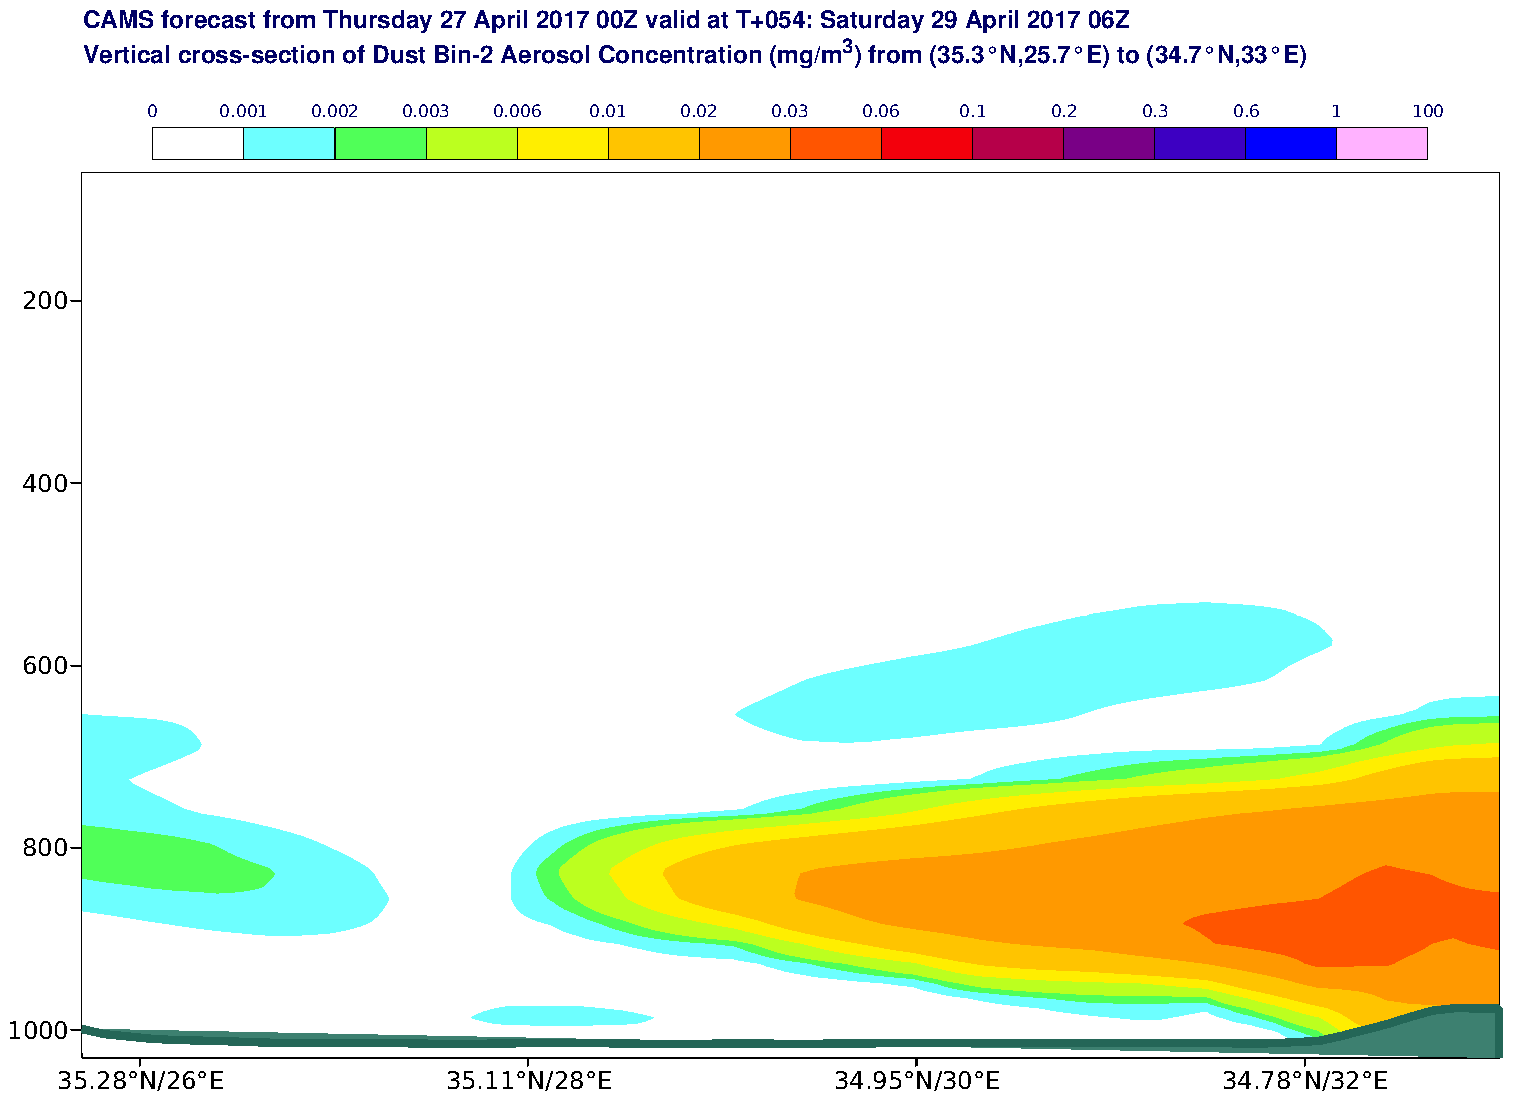 Vertical cross-section of Dust Bin-2 Aerosol Concentration (mg/m3) valid at T54 - 2017-04-29 06:00